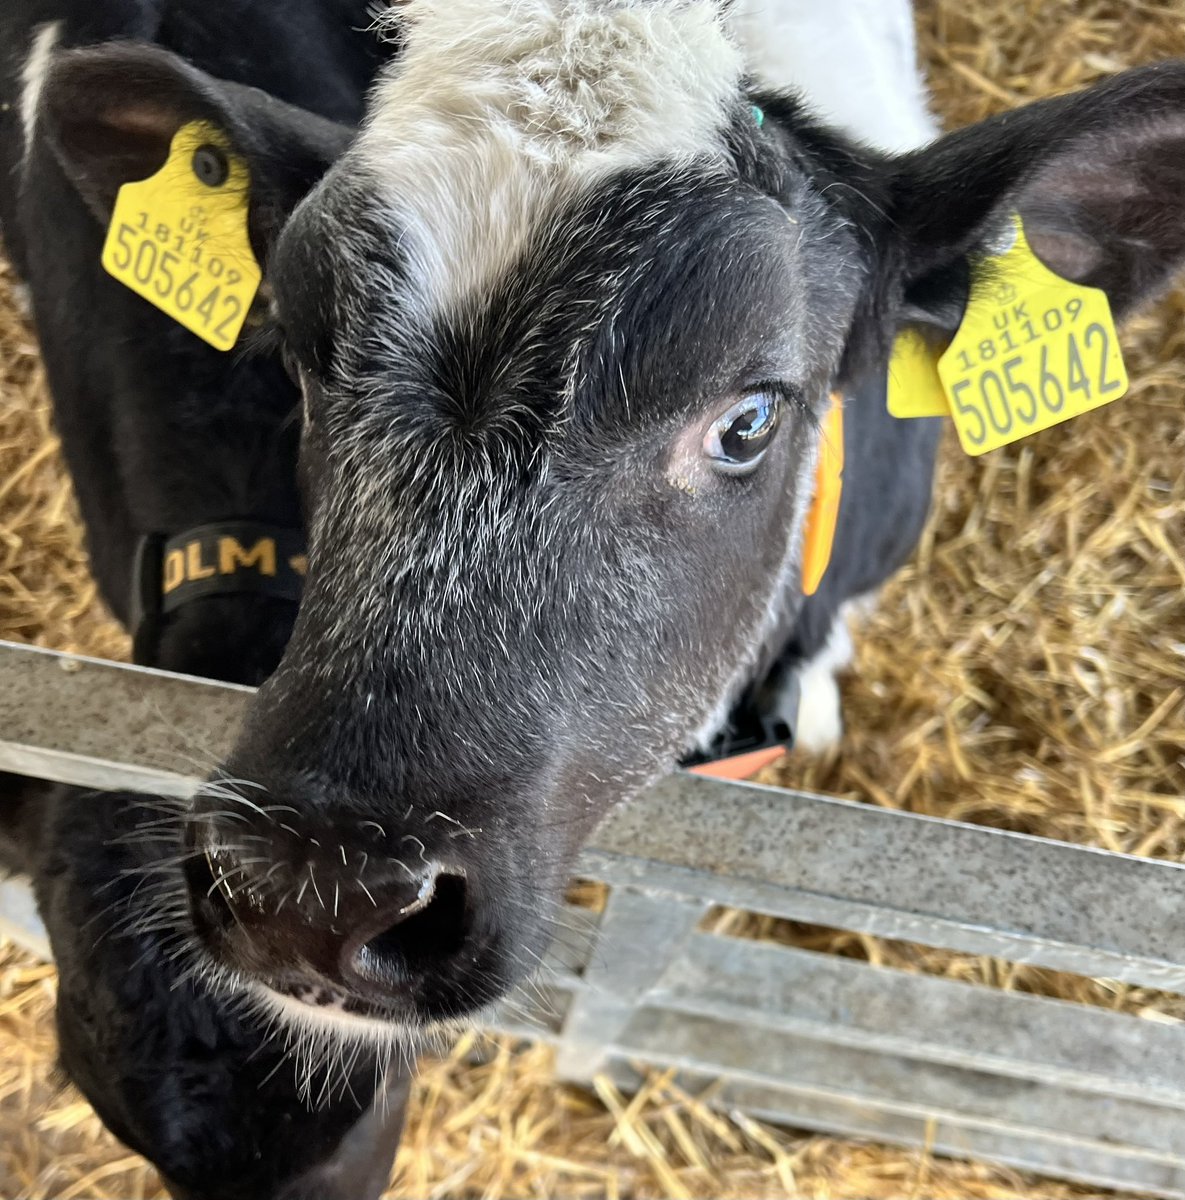 We welcomed associates from @GatsbyEd to our beautiful @MyerscoughColl campus today to have talks on the current & future provision of technical education in the areas of #Landbased and #STEM (I’ll take any excuse to go and visit our gorgeous calves! 🐮 ❤️) @JackieHough2